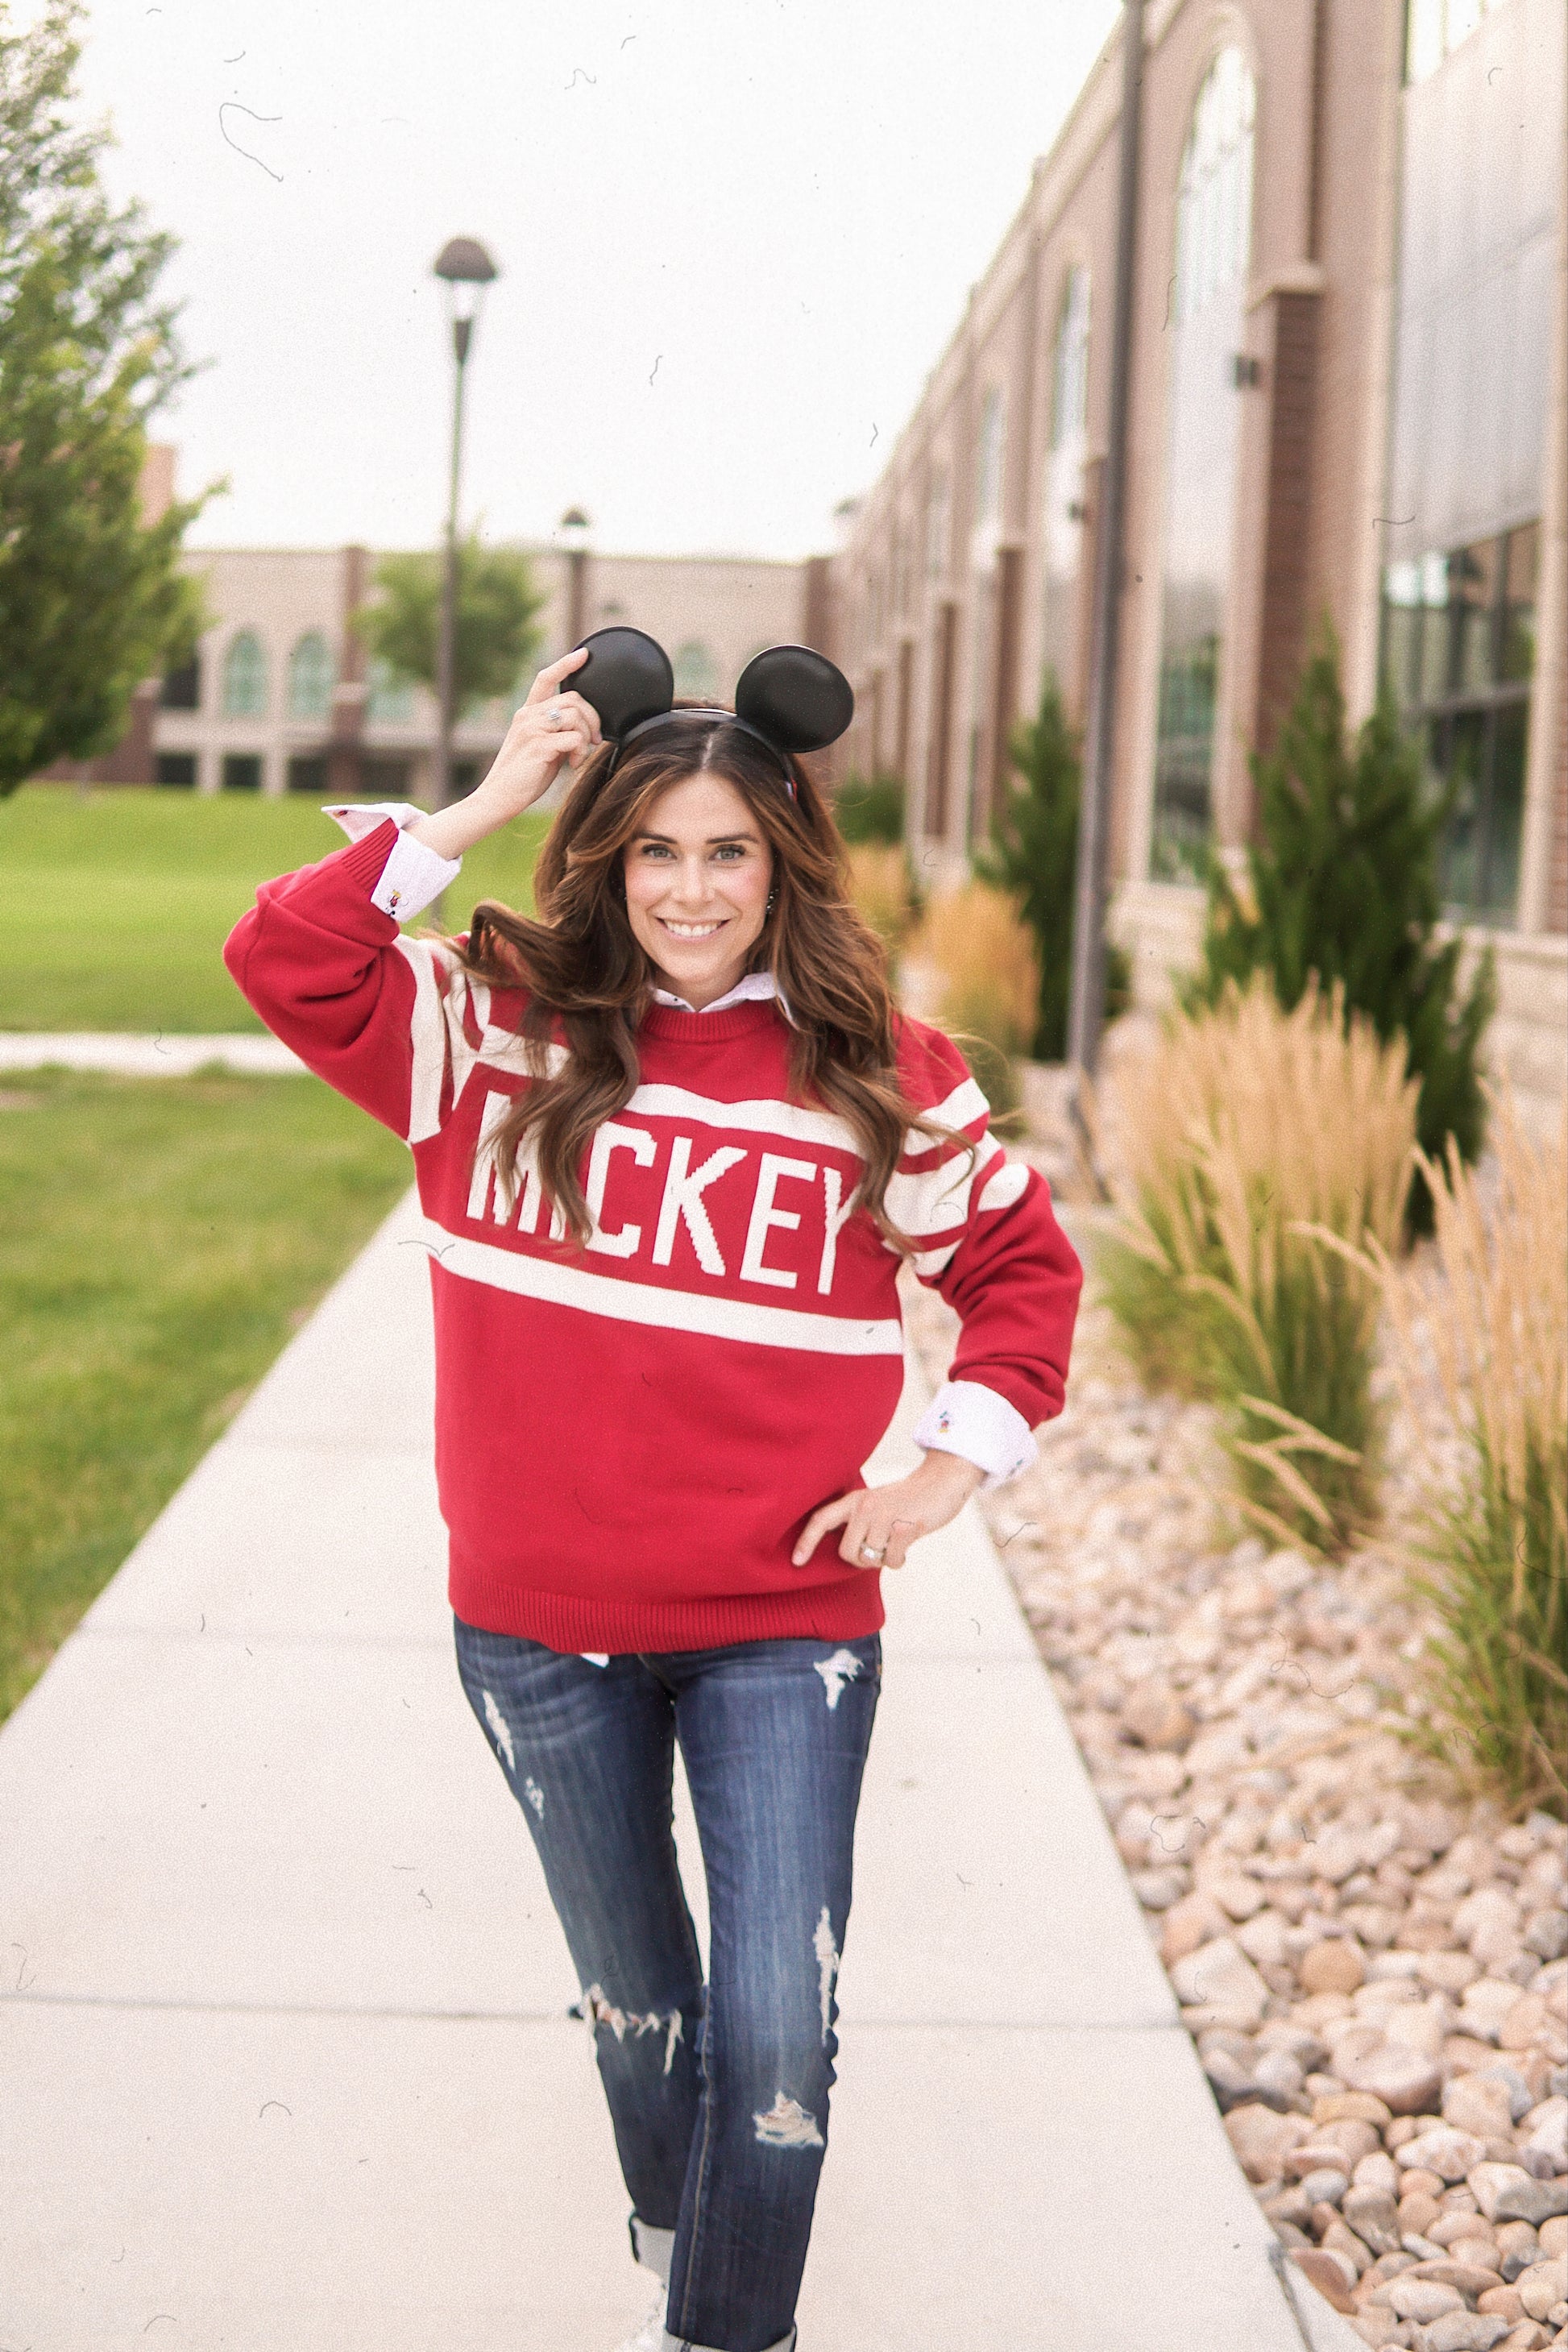 Mickey Spirit Sweater perfect for cold days in the parks. With striping on the sleeve this knit top is sporty and stylisih.